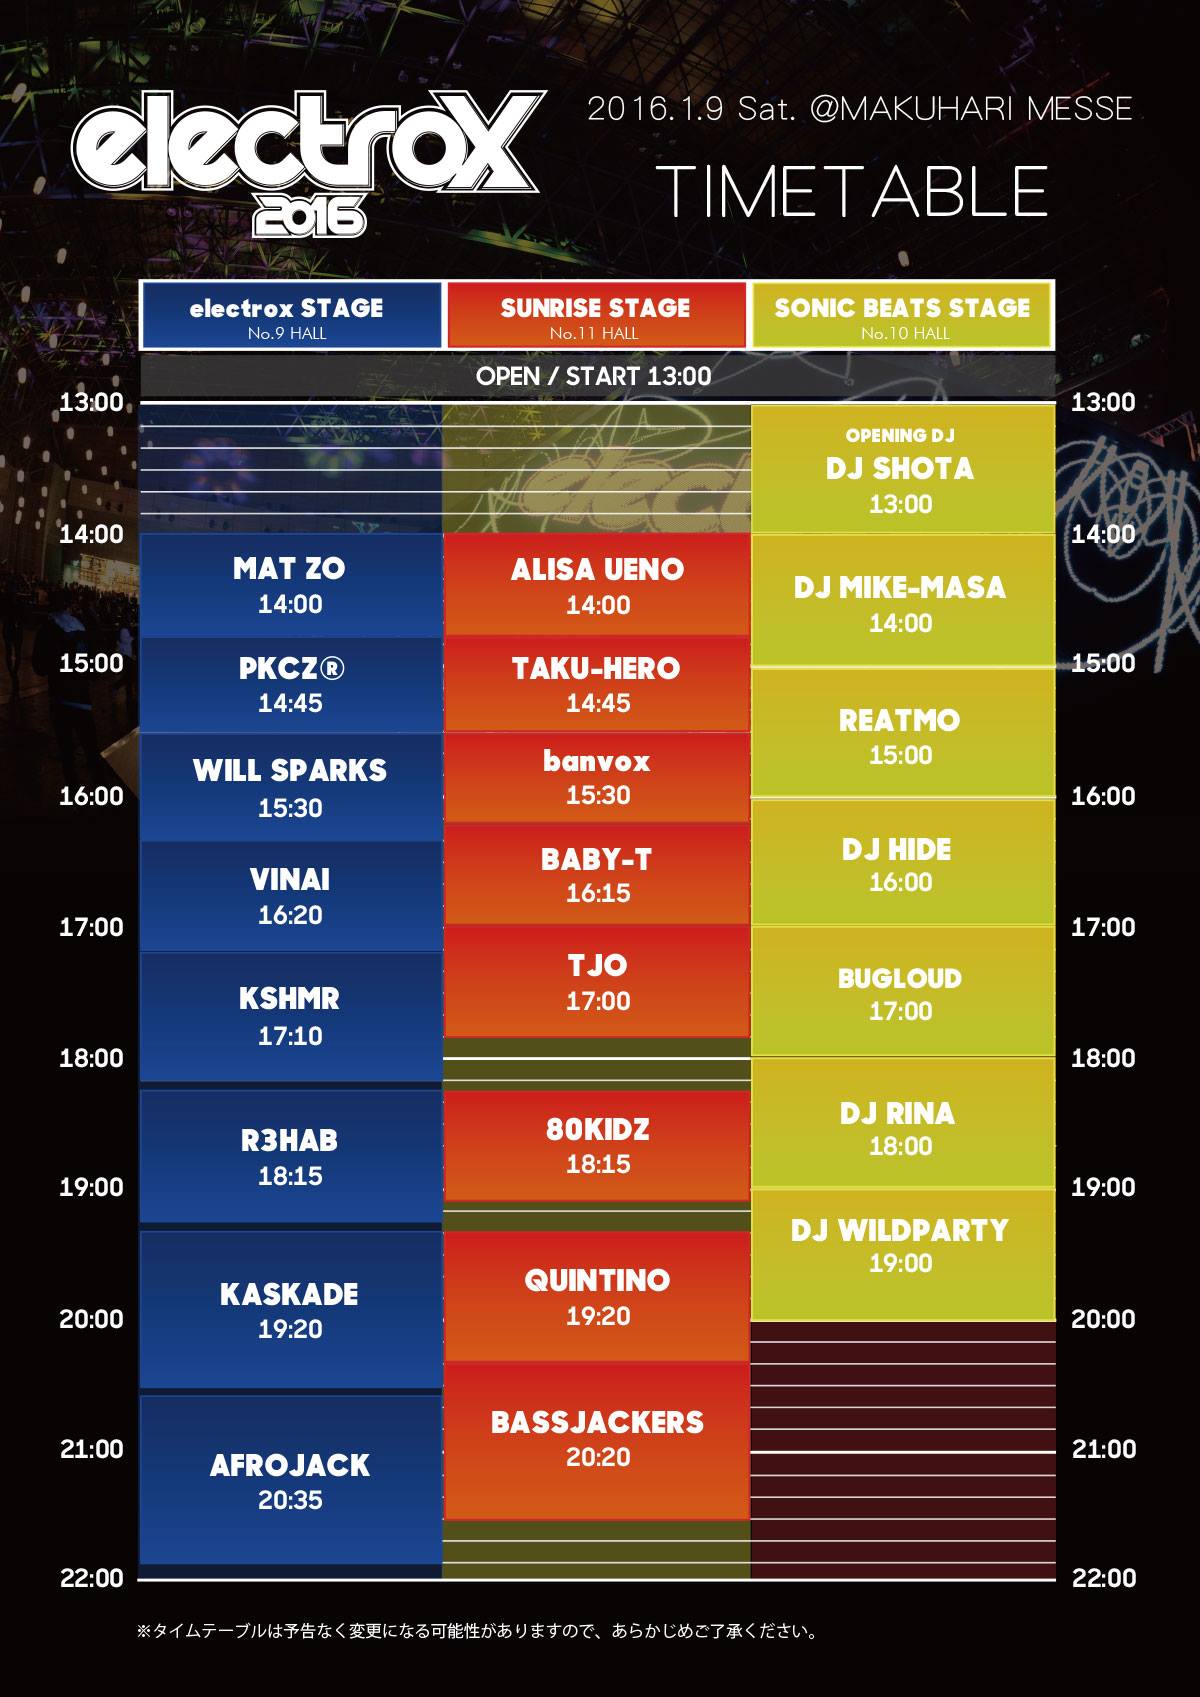 electrox 2016 TIMETABLE